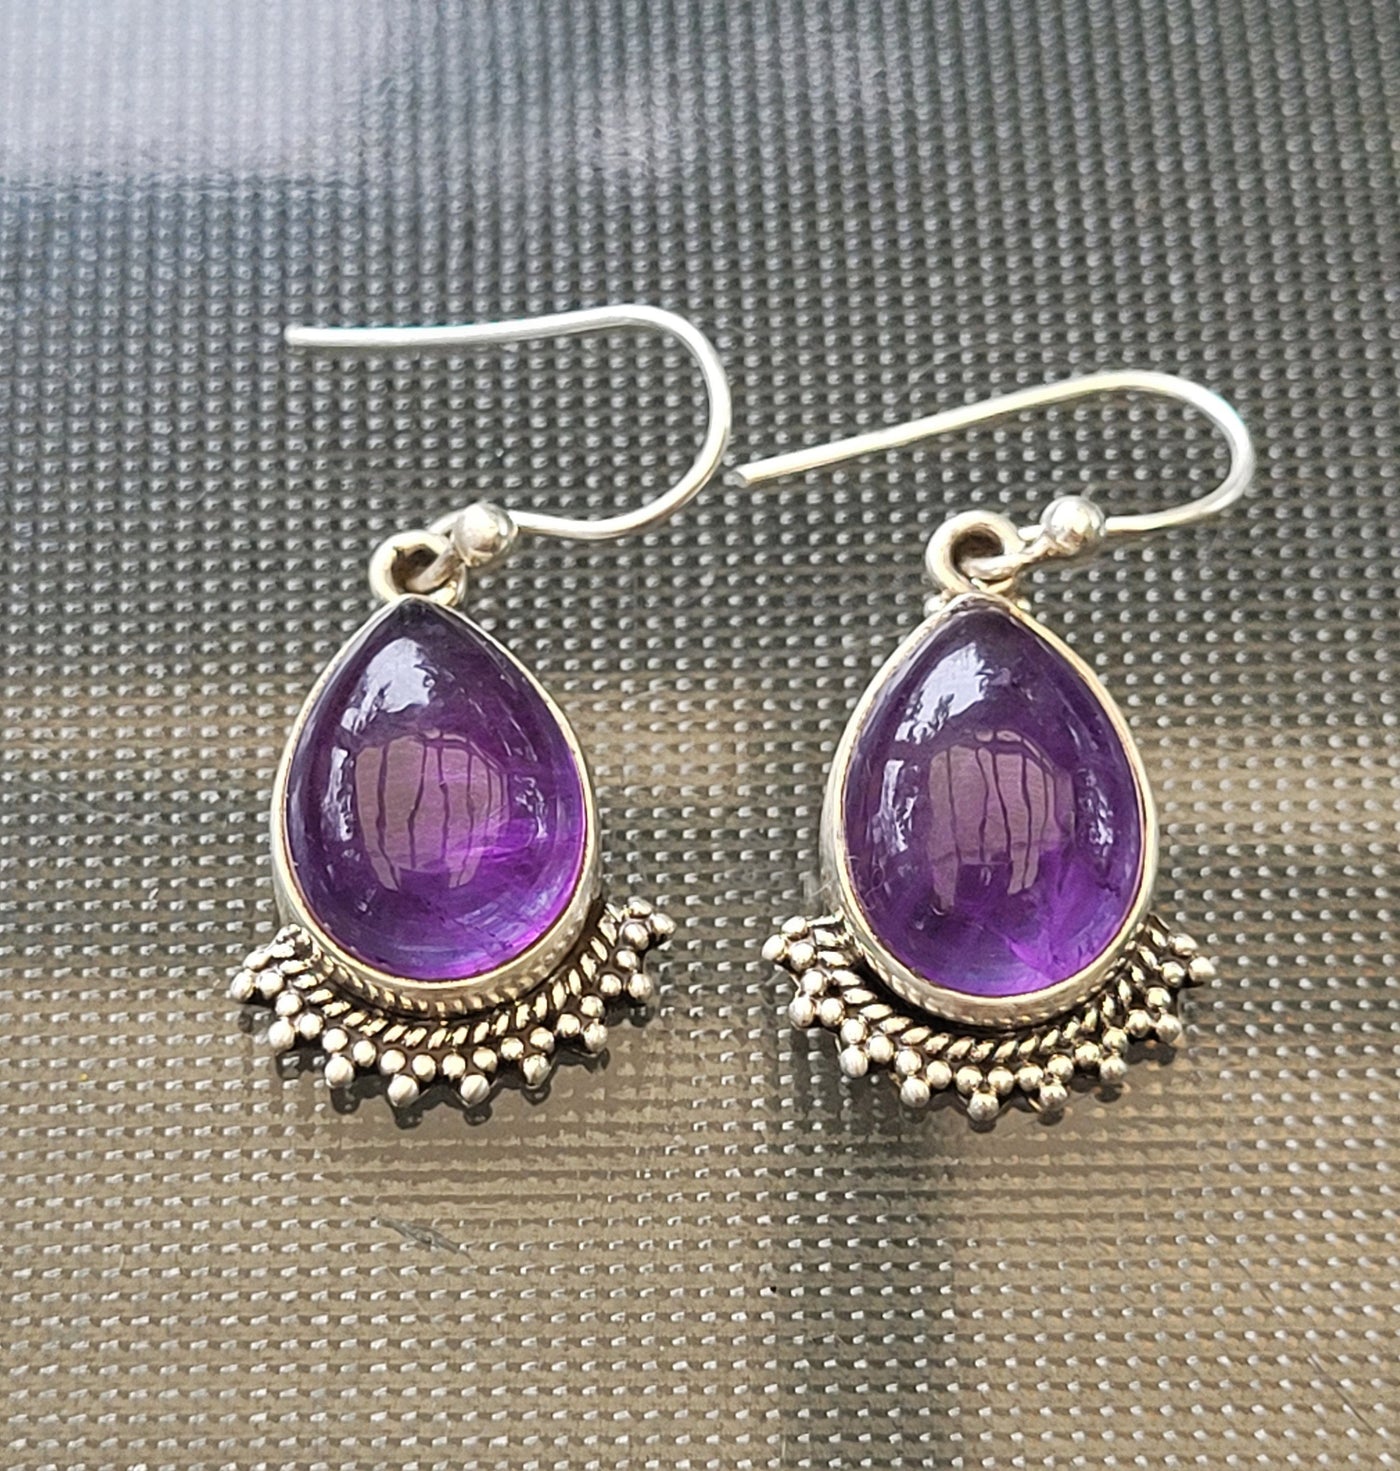 Amazon.com: Amethyst Earrings, Certified 40.54 Carat Amethyst Studs  Appraised at 2,000.00 Oval Cut, February Birthstone Genuine Real Amethyst  Jewelry : Handmade Products